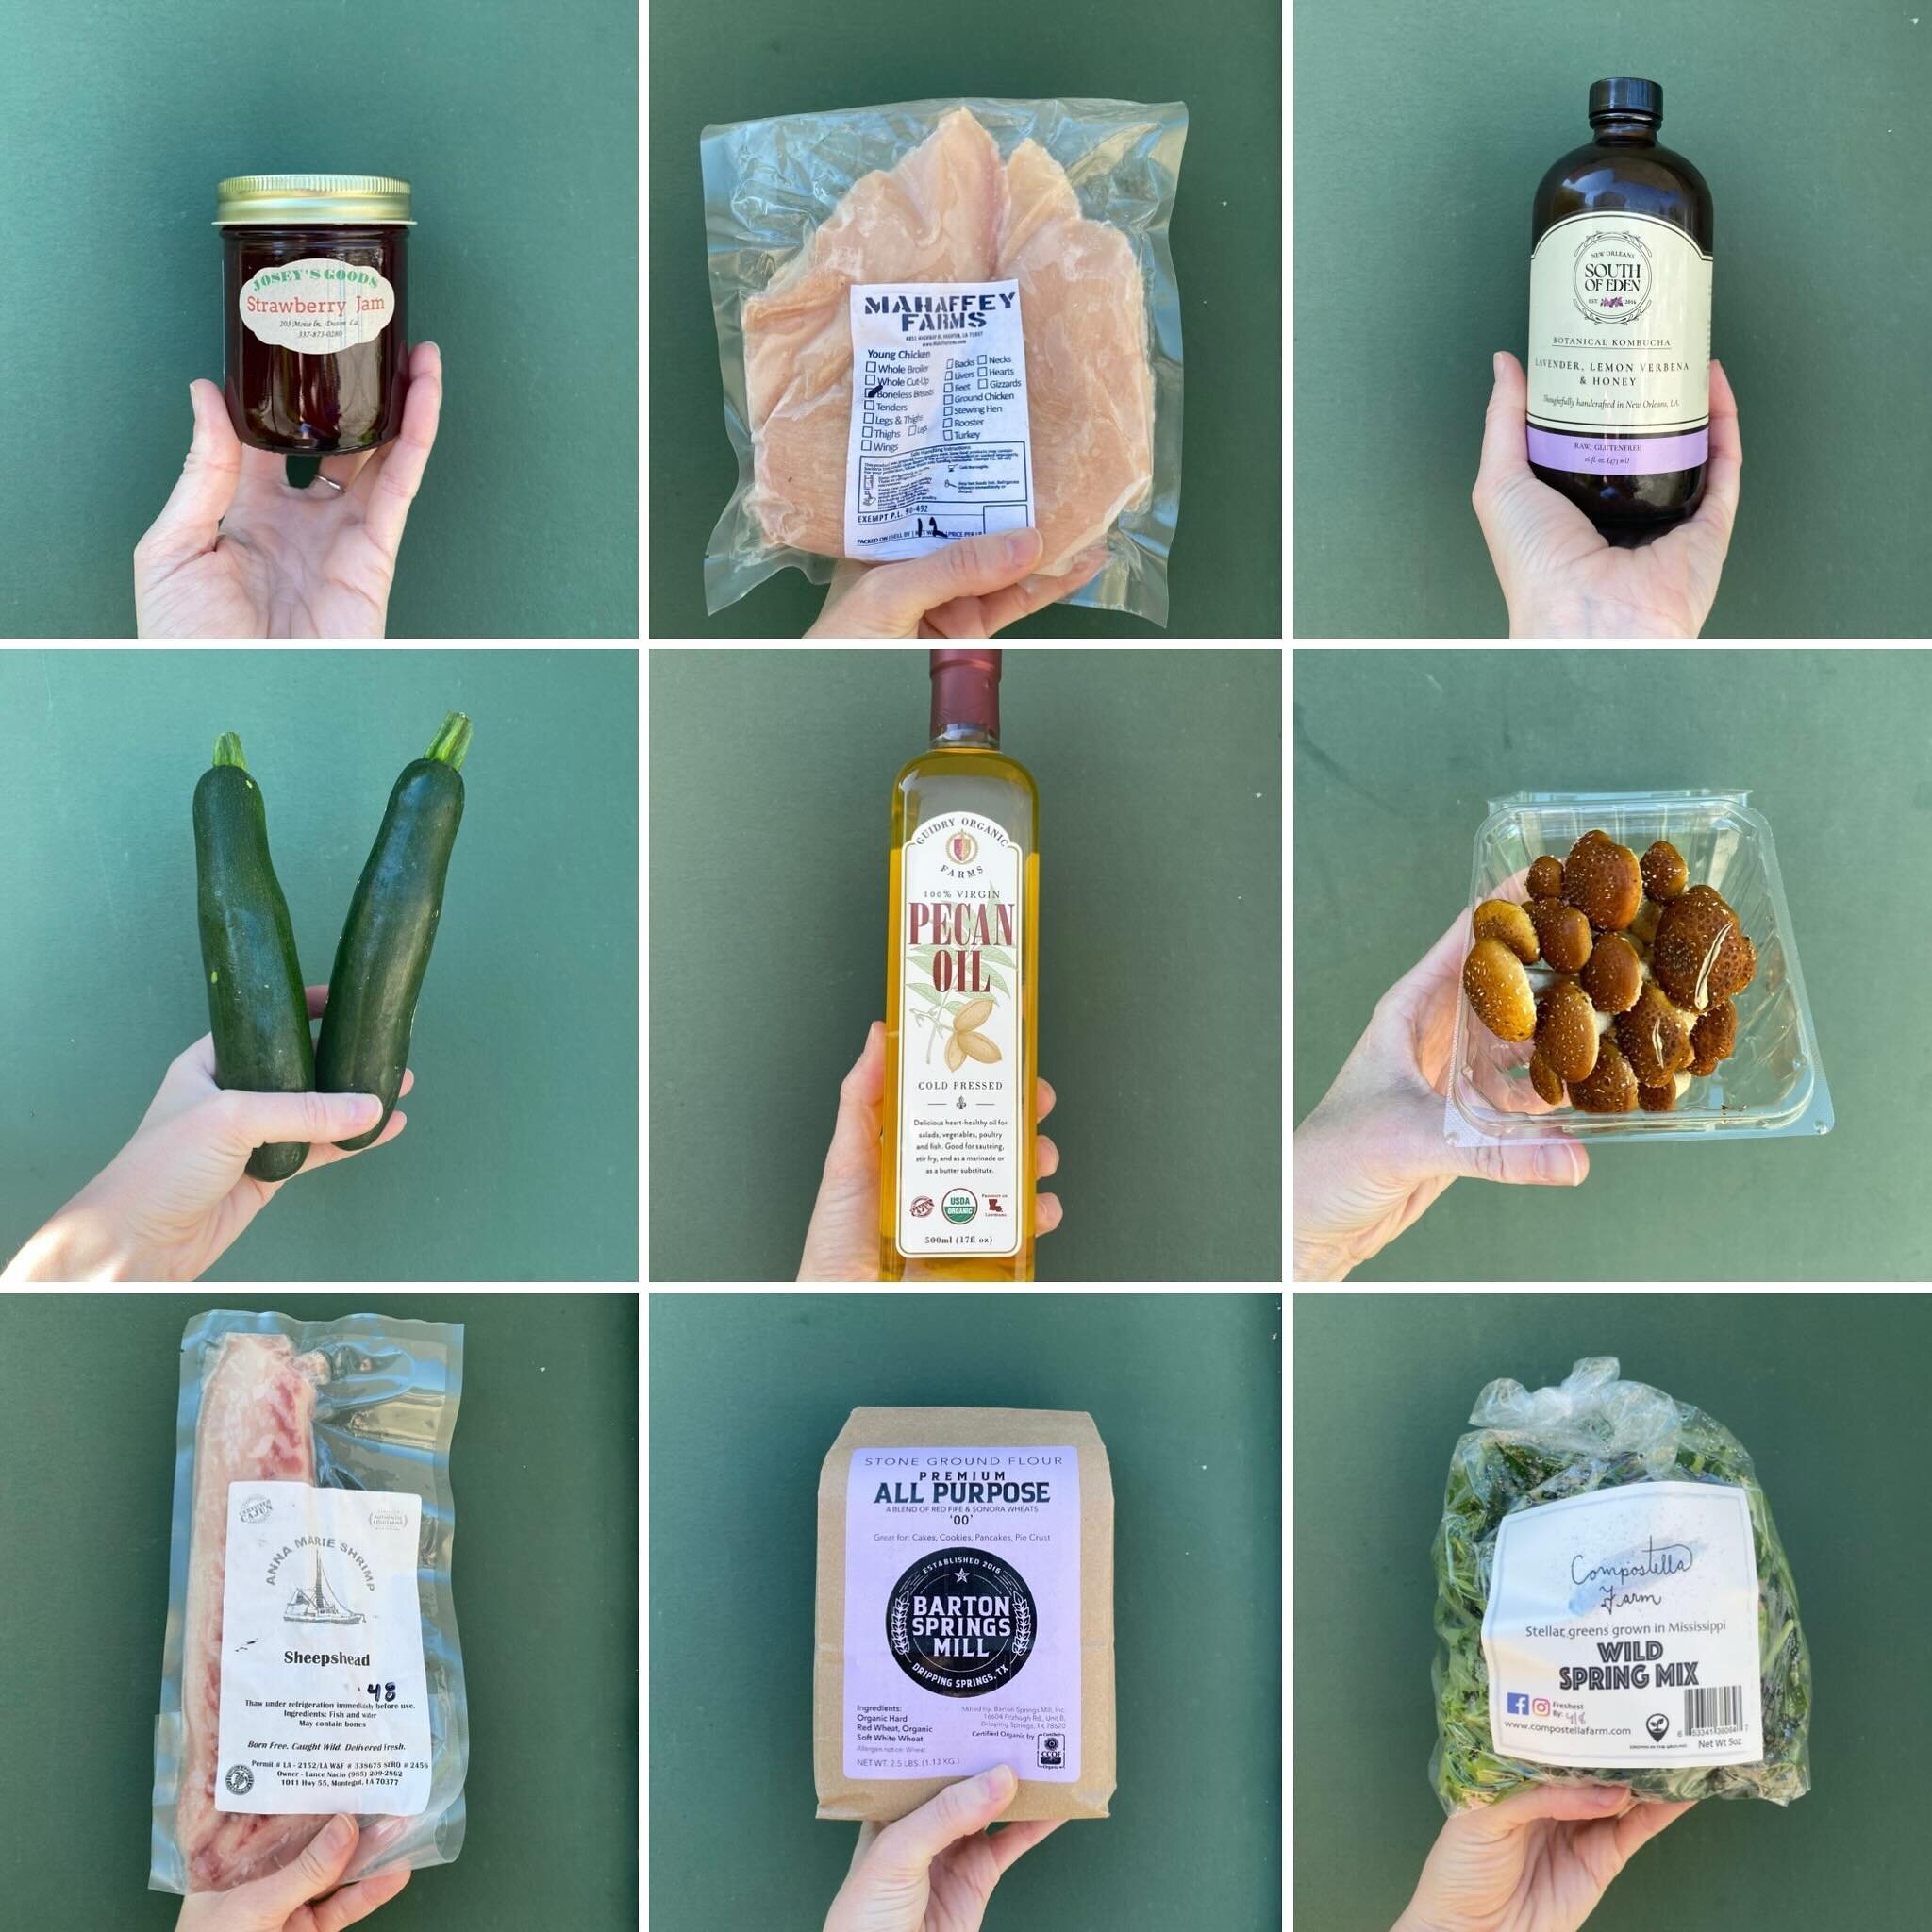 Nine of our featured local products right now&hellip;

Including restocked chicken and fish, spring greens, zucchini, gourmet mushrooms, a larger bargain size of cold pressed pecan oil, strawberry jam, kombucha and more.

Come see us in Metairie on t